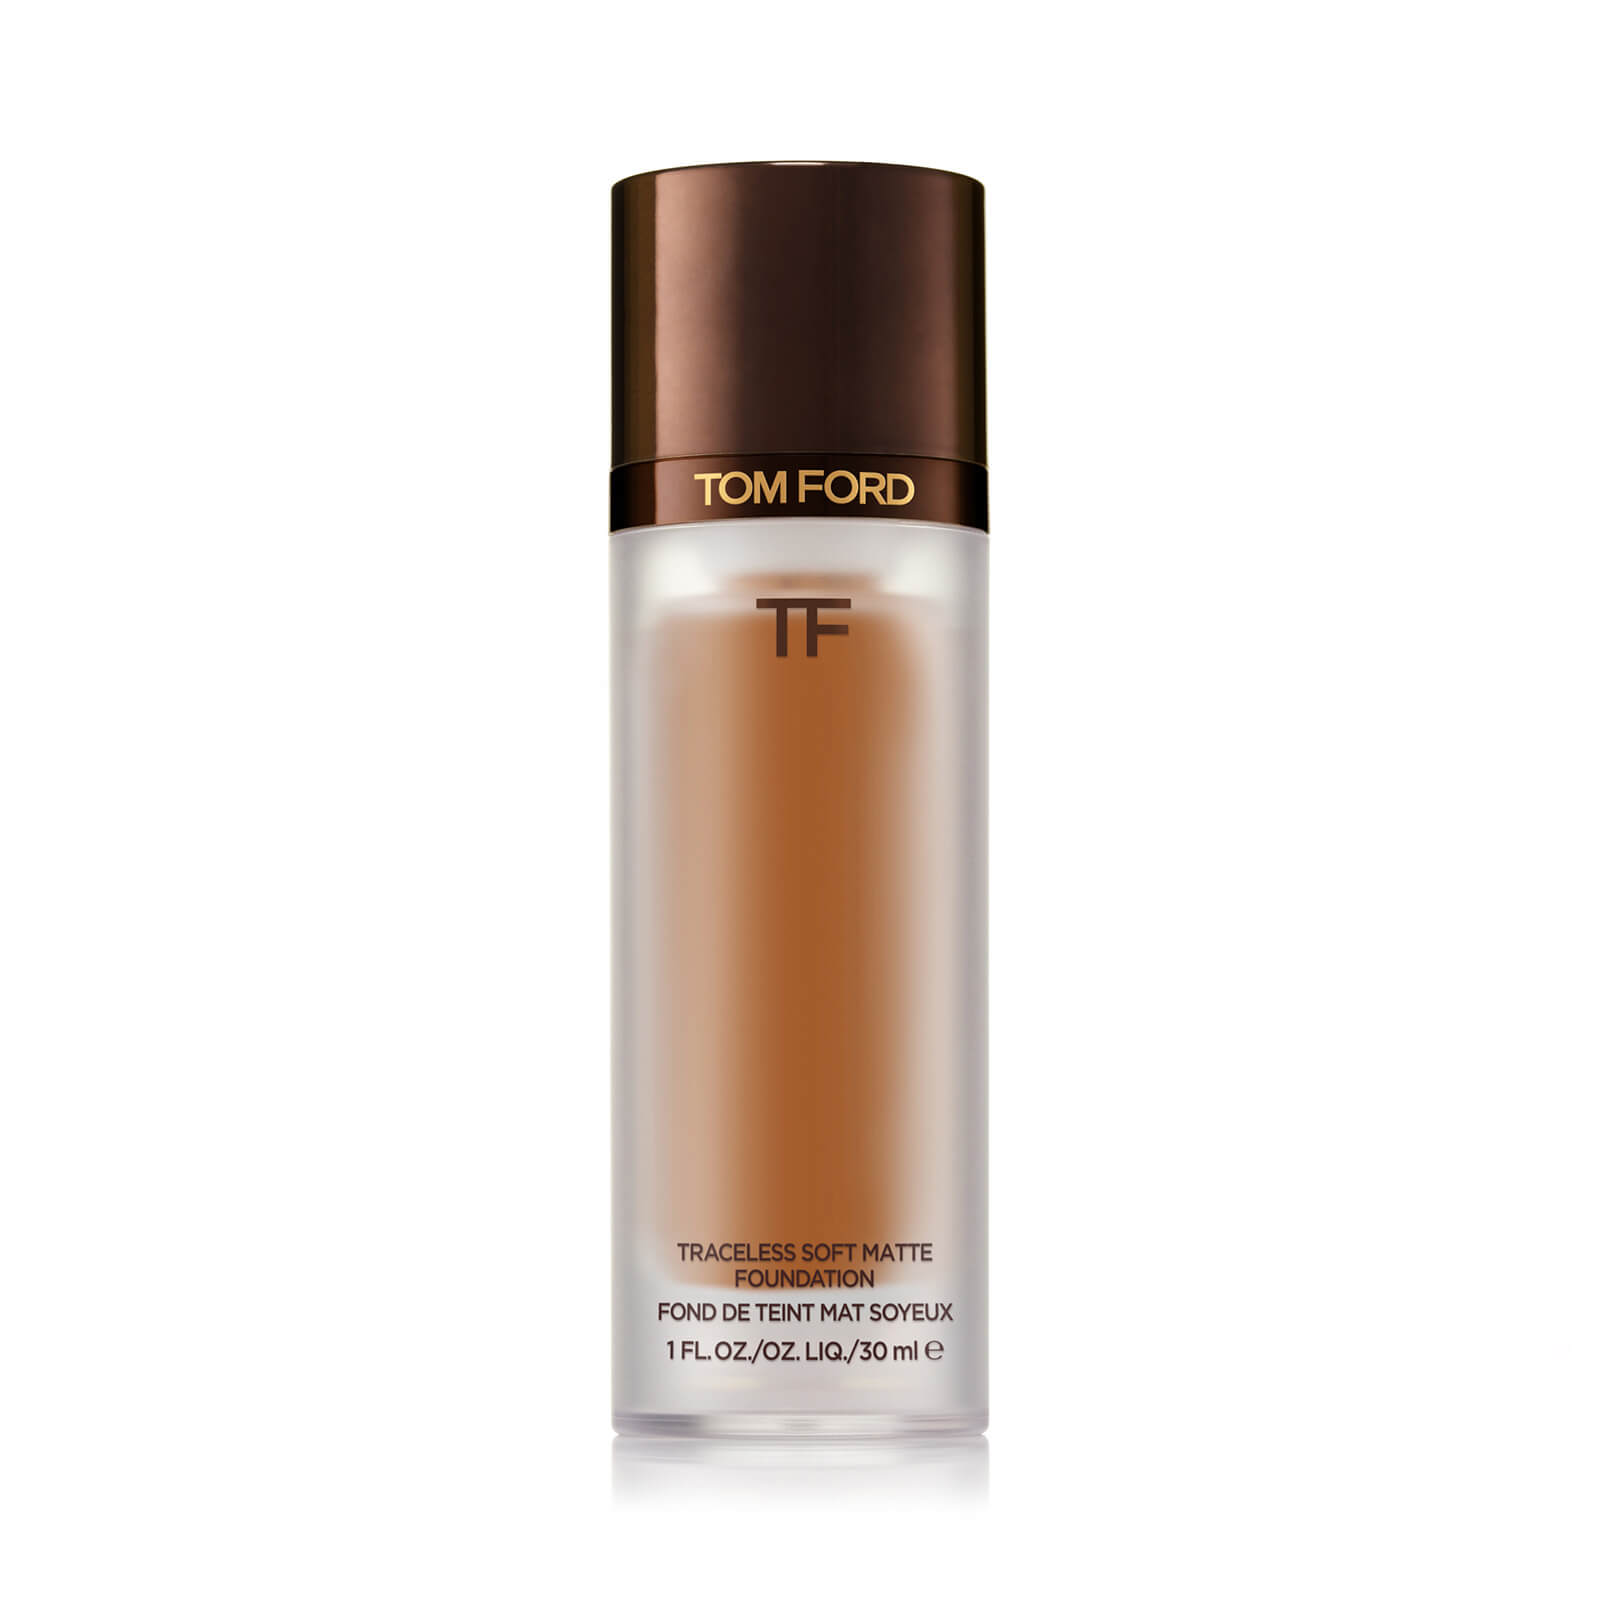 Tom Ford Traceless Soft Matte Foundation 30ml (Various Shades) - Warm Almond